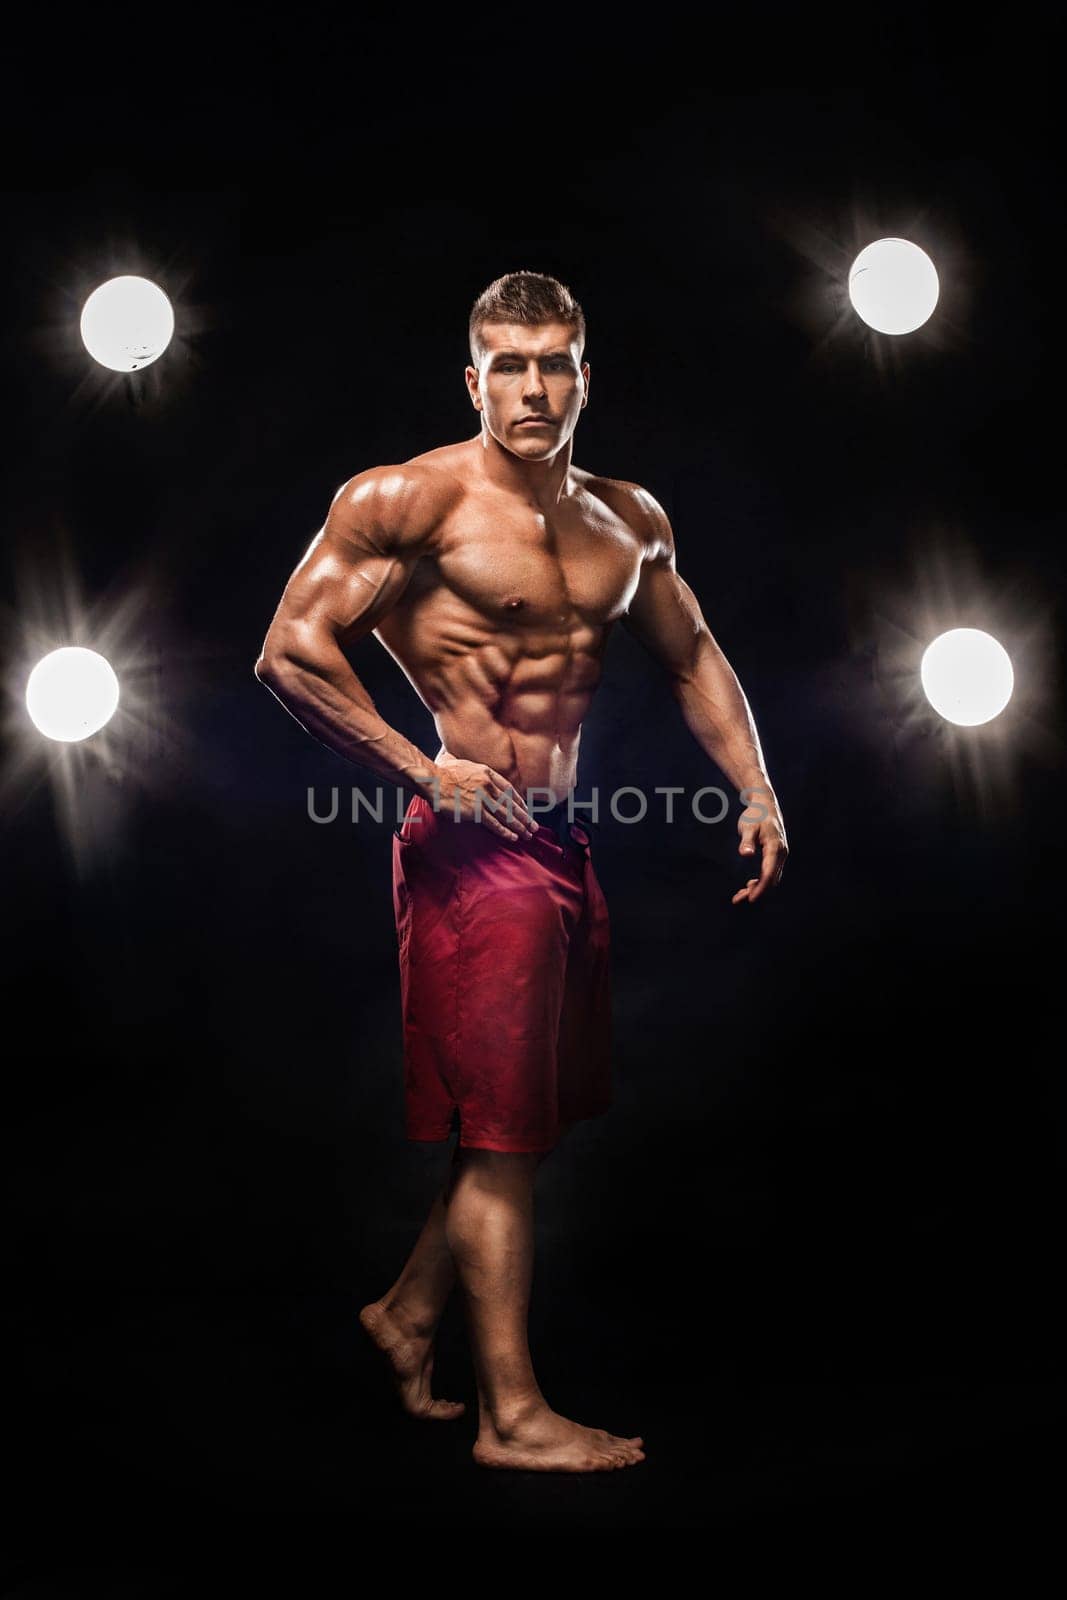 Brutal strong muscular bodybuilder athlete man pumping up muscles on black background. Workout bodybuilding concept. Copy space for sport nutrition ads. by MikeOrlov